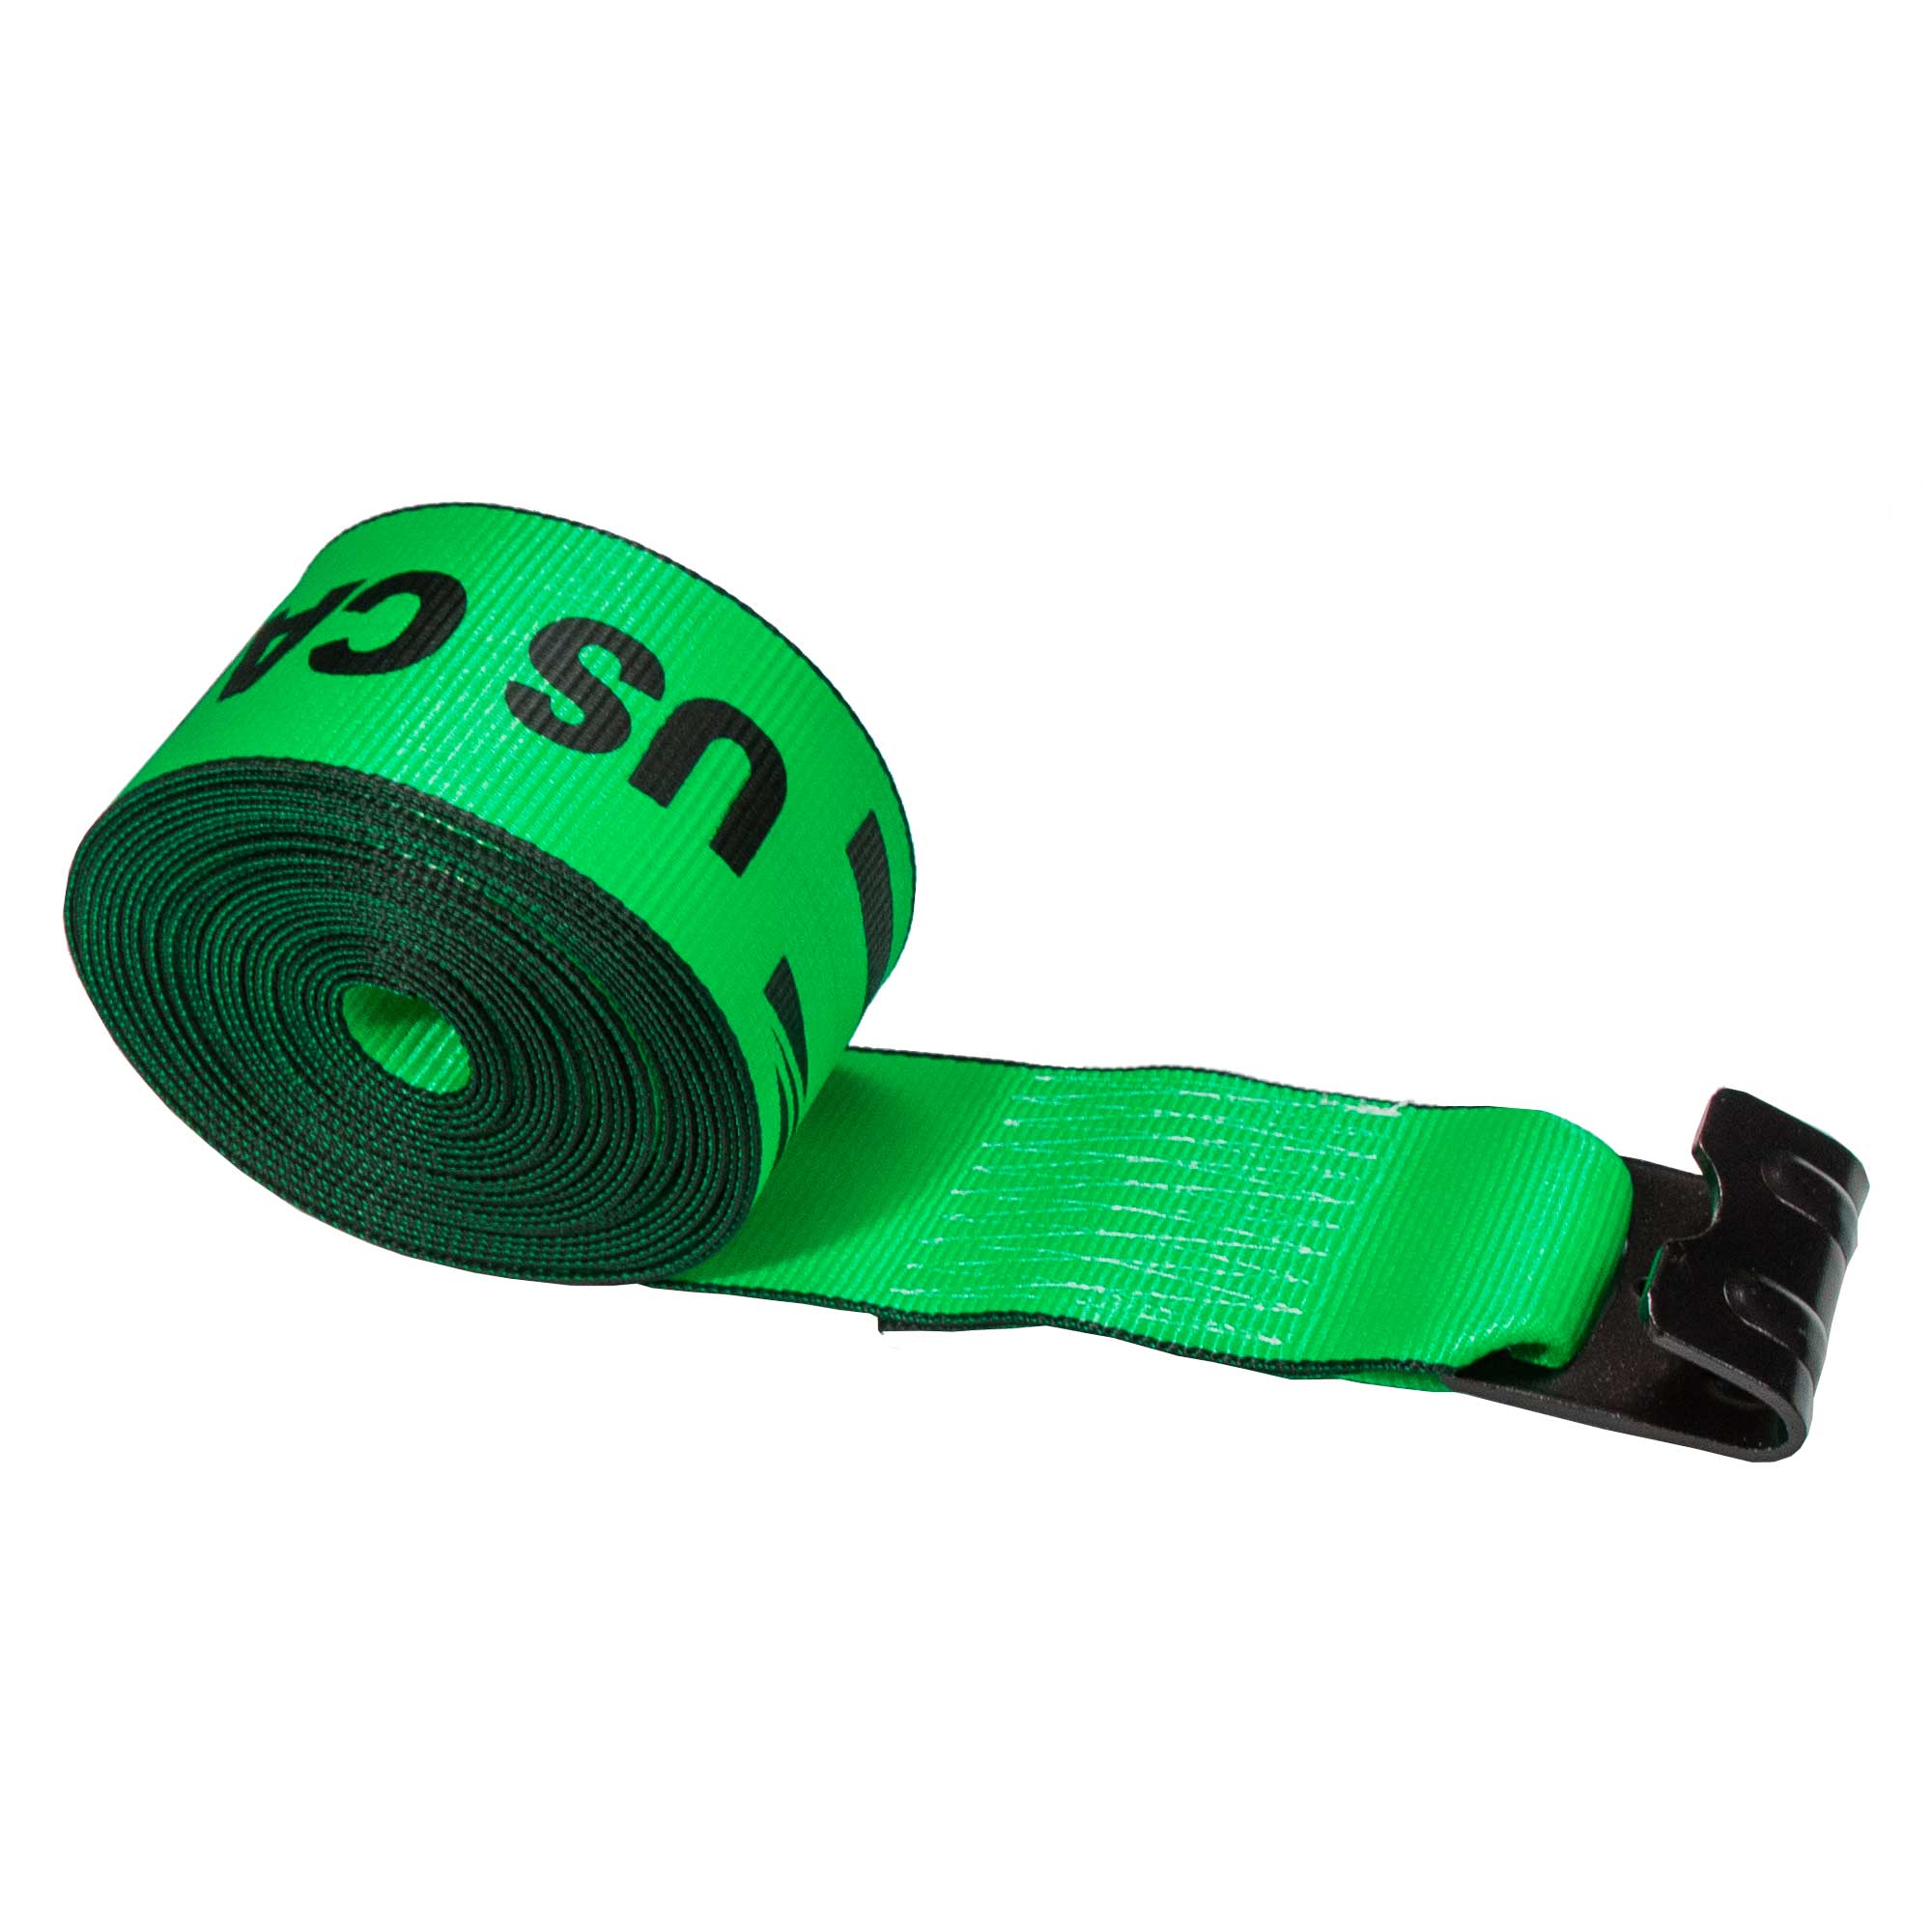 US Cargo Control 430FHGRN 4 x 30' Winch Strap with Flat Hook & Defend